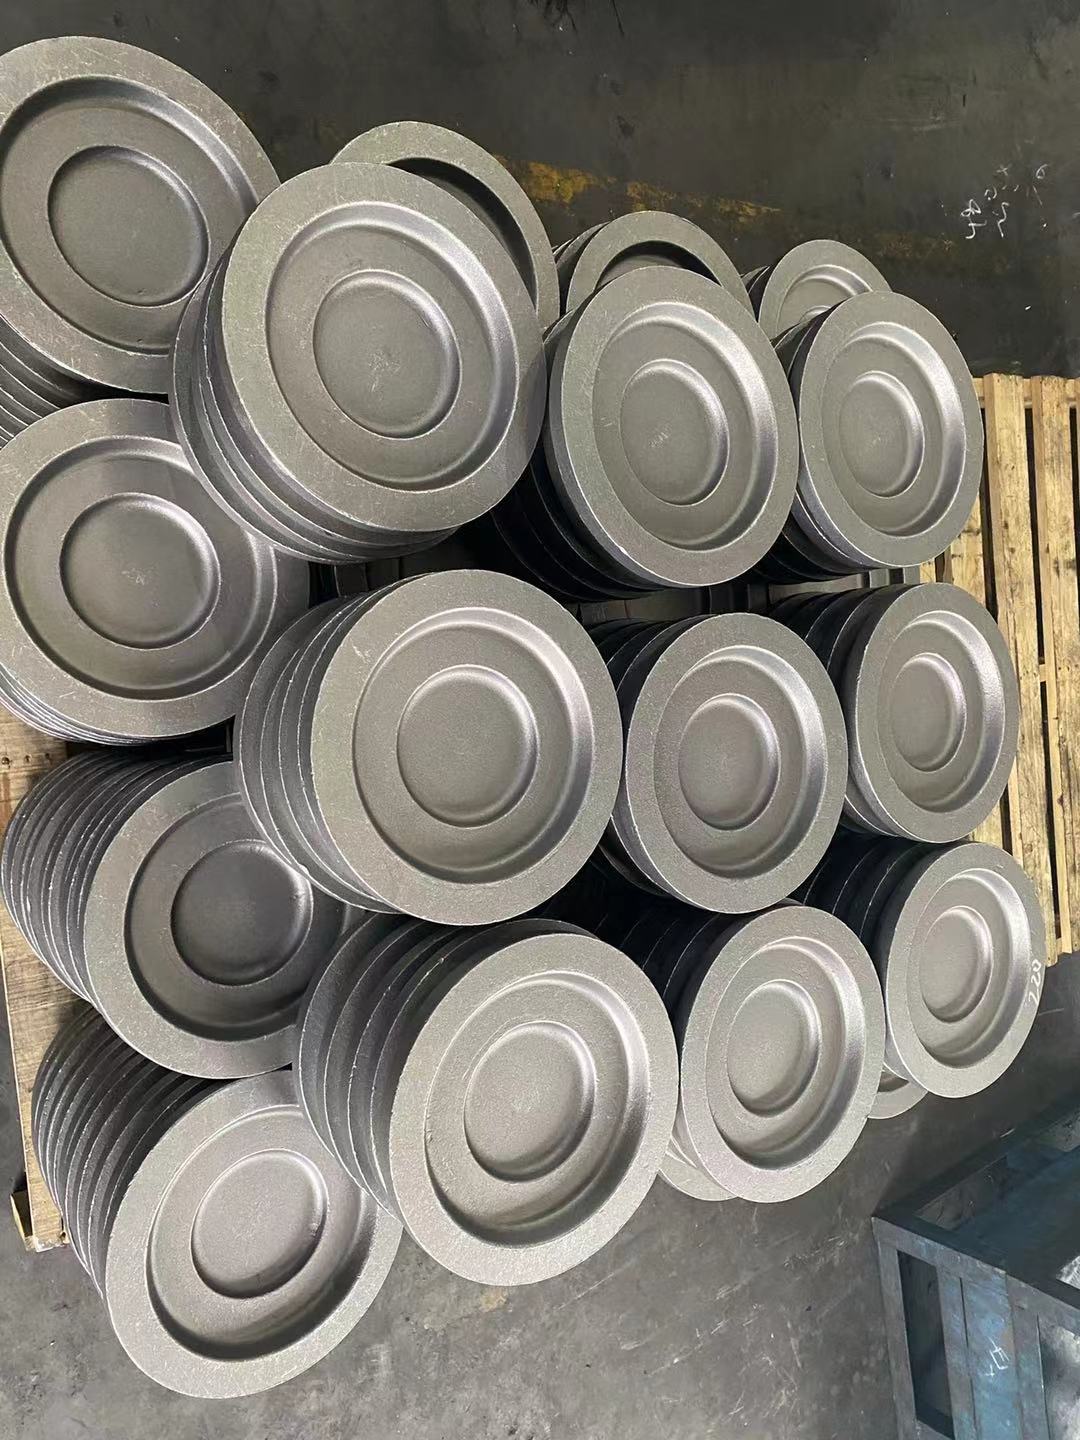 How does a forge make a high density forgings